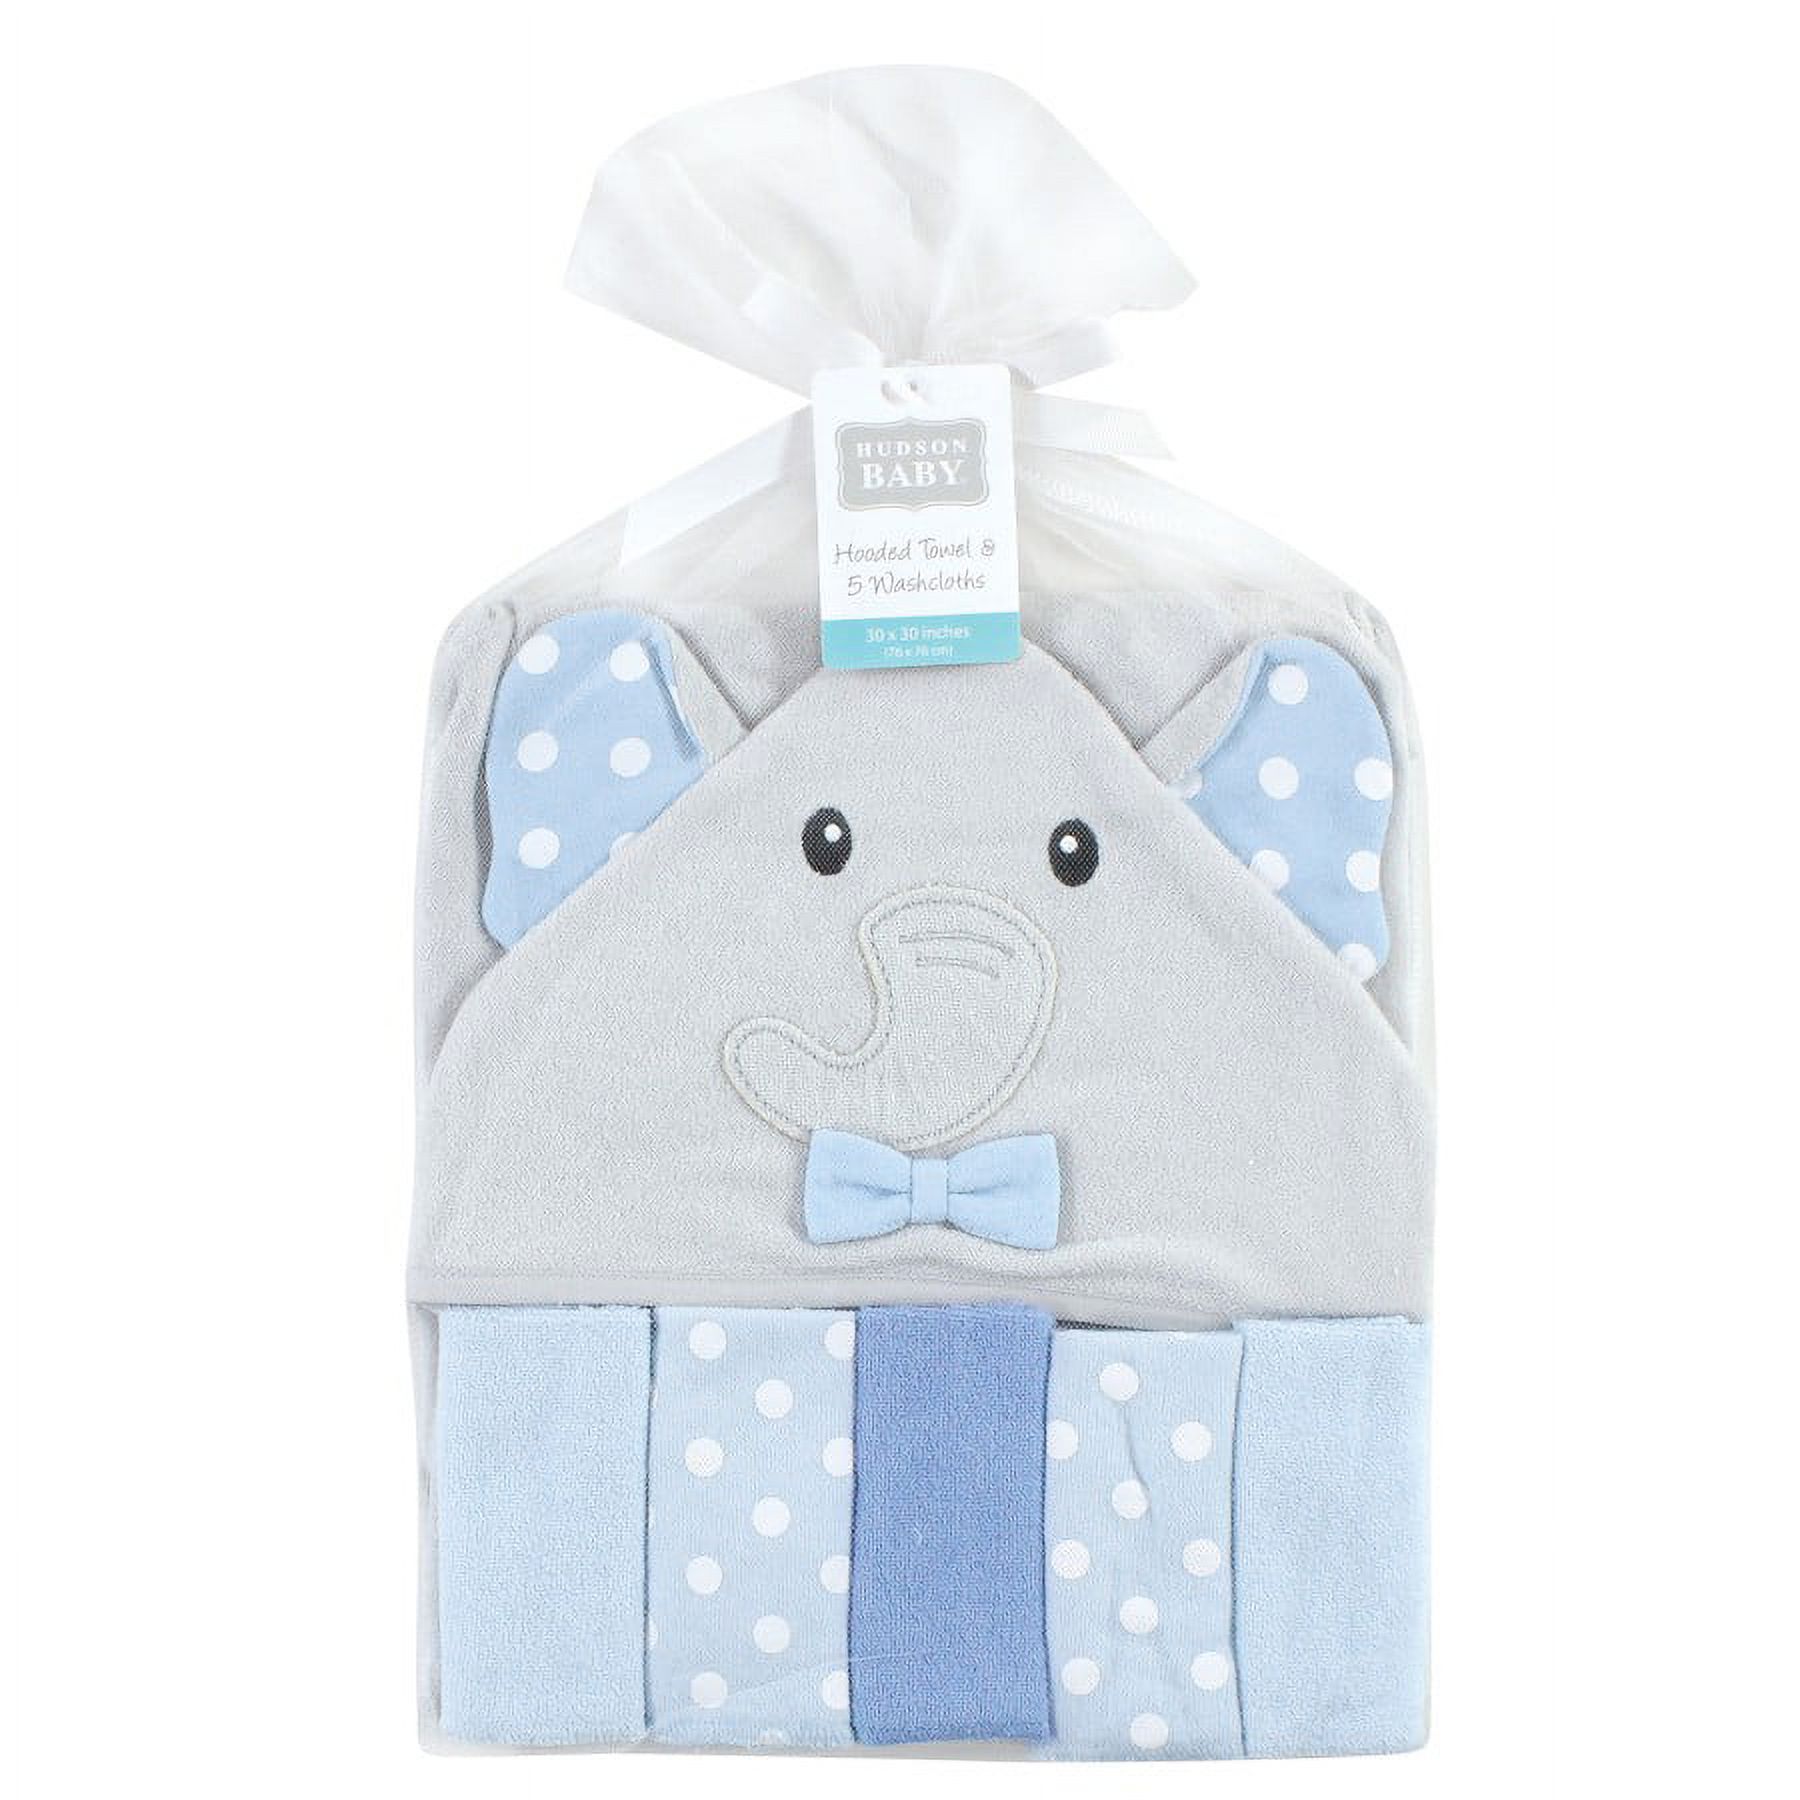 Hudson Baby Infant Boy Hooded Towel and Five Washcloths, White Dots Gray Elephant, One Size - image 2 of 2